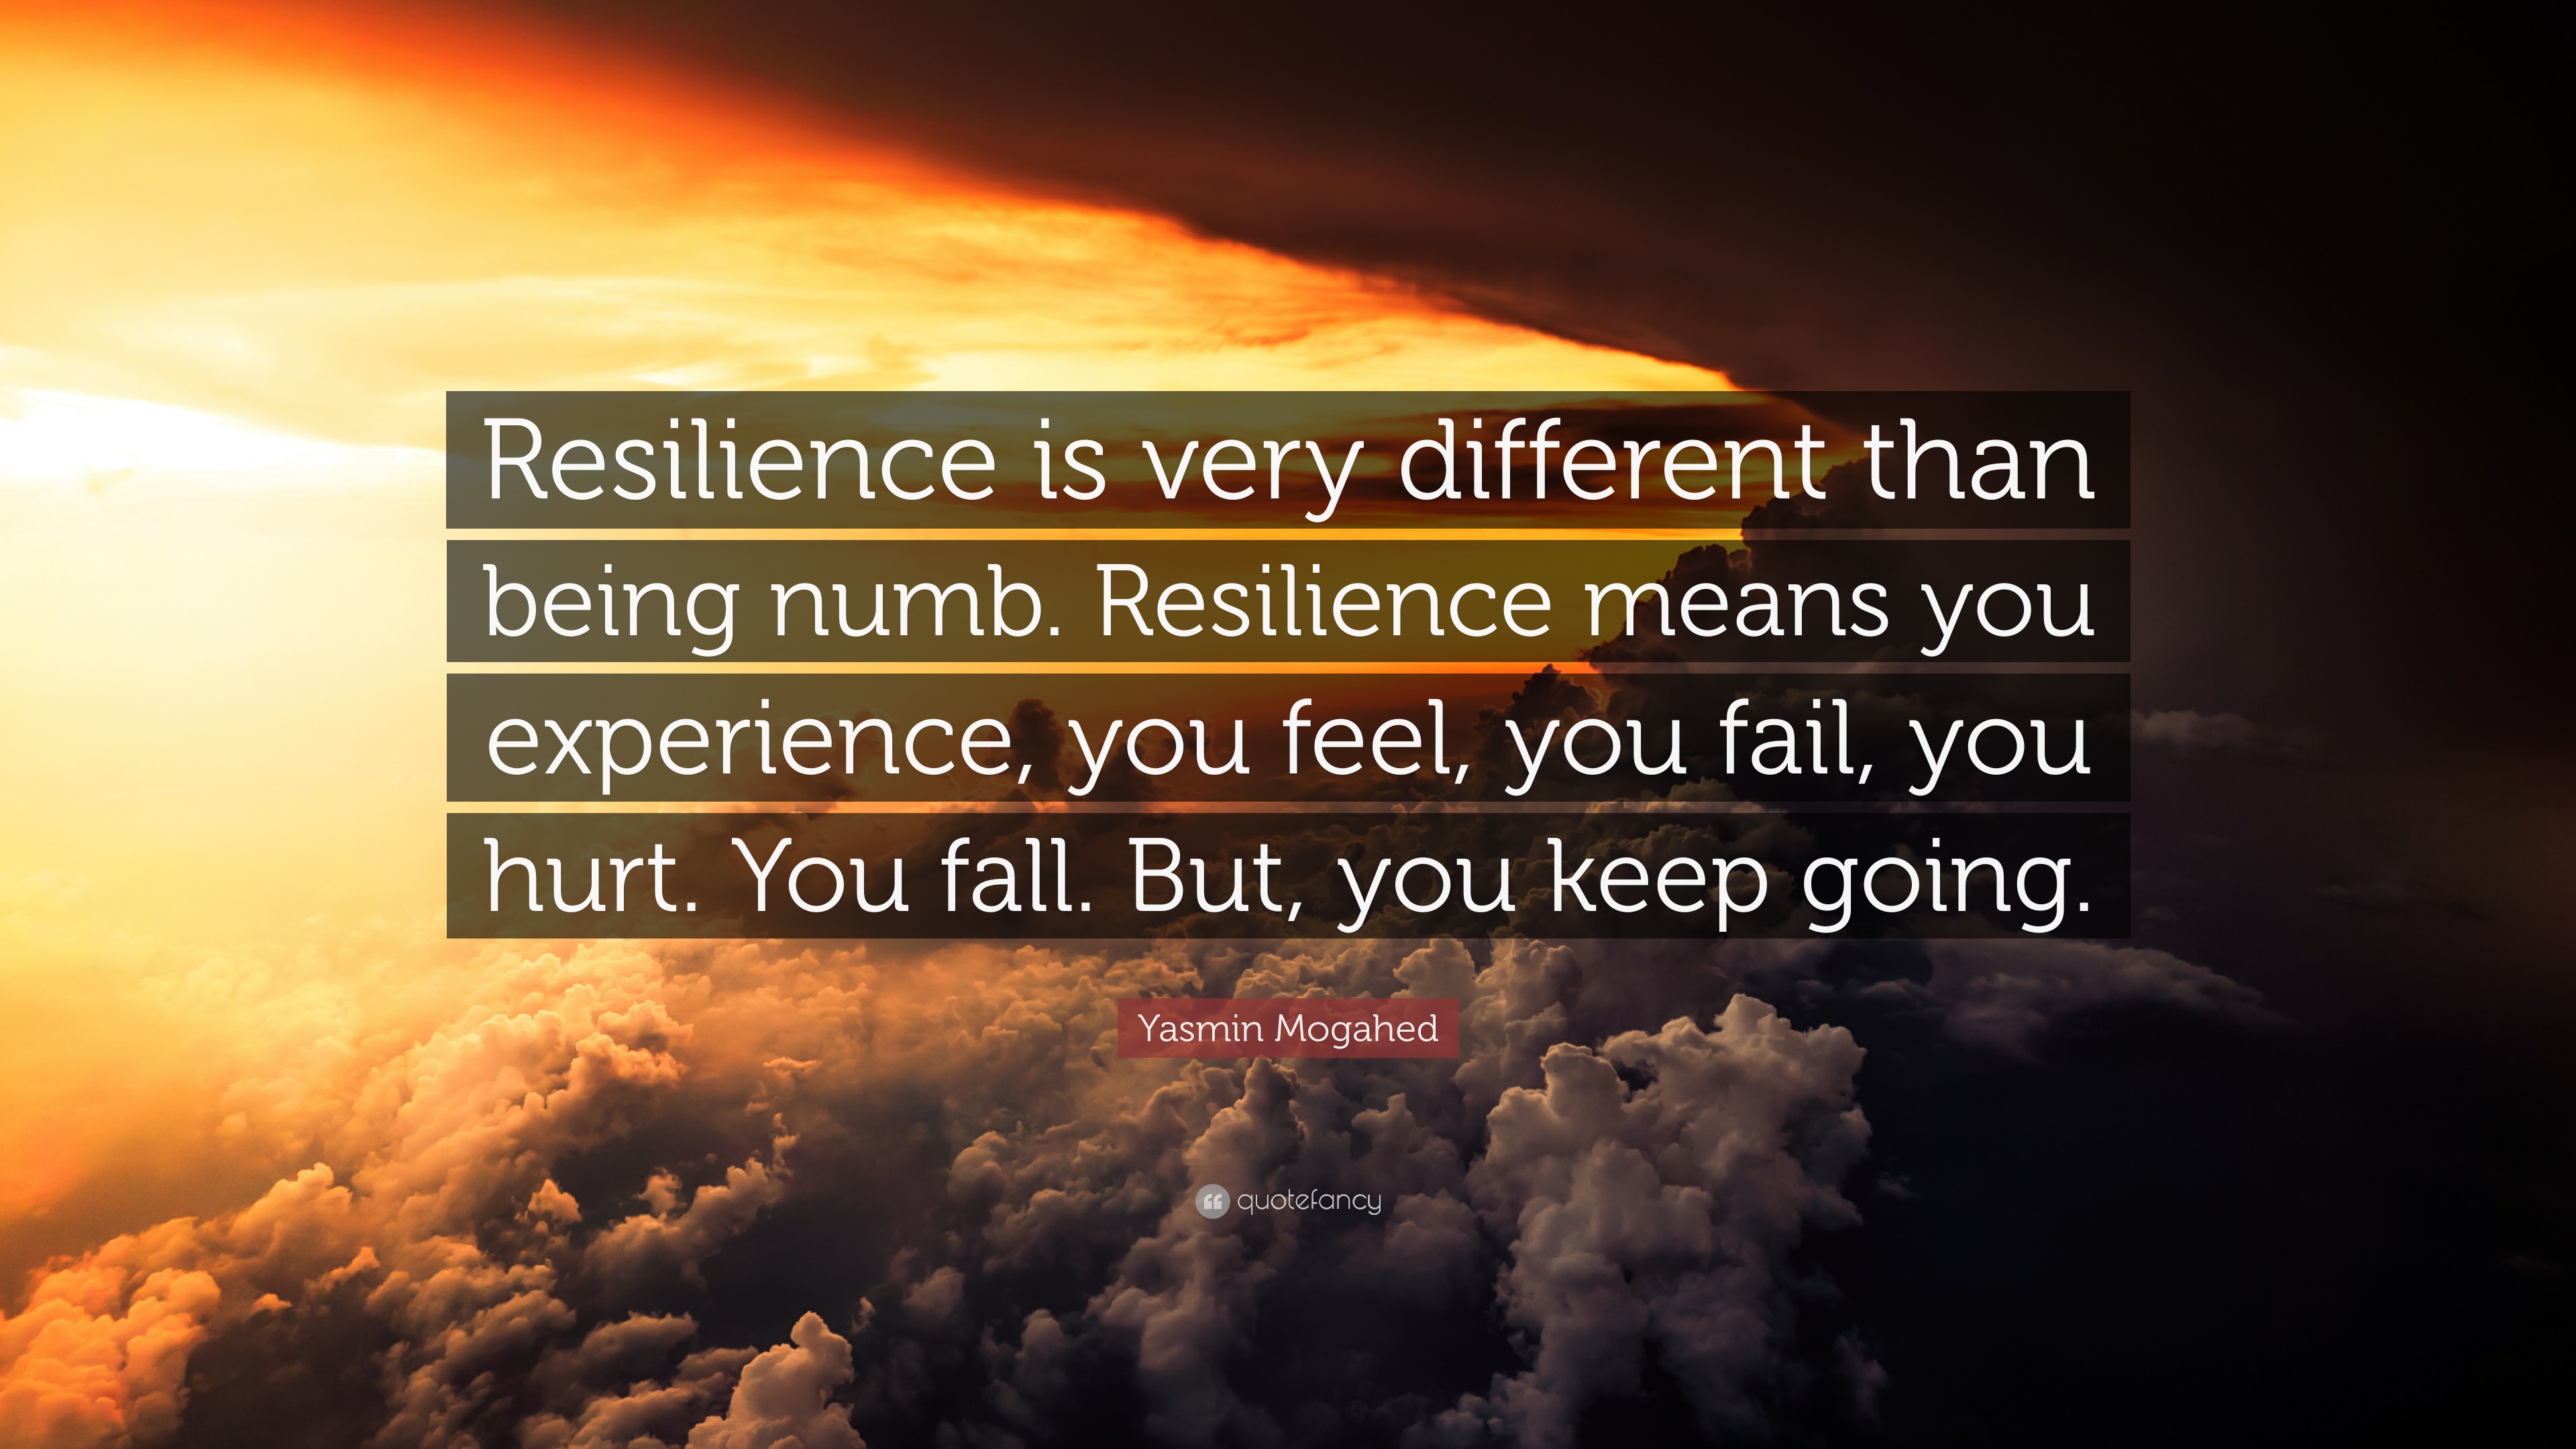 Yasmin Mogahed Quote: “Resilience is very different than being numb. Resilience means you experience, you feel, you fail, you hurt. You fall. B.”